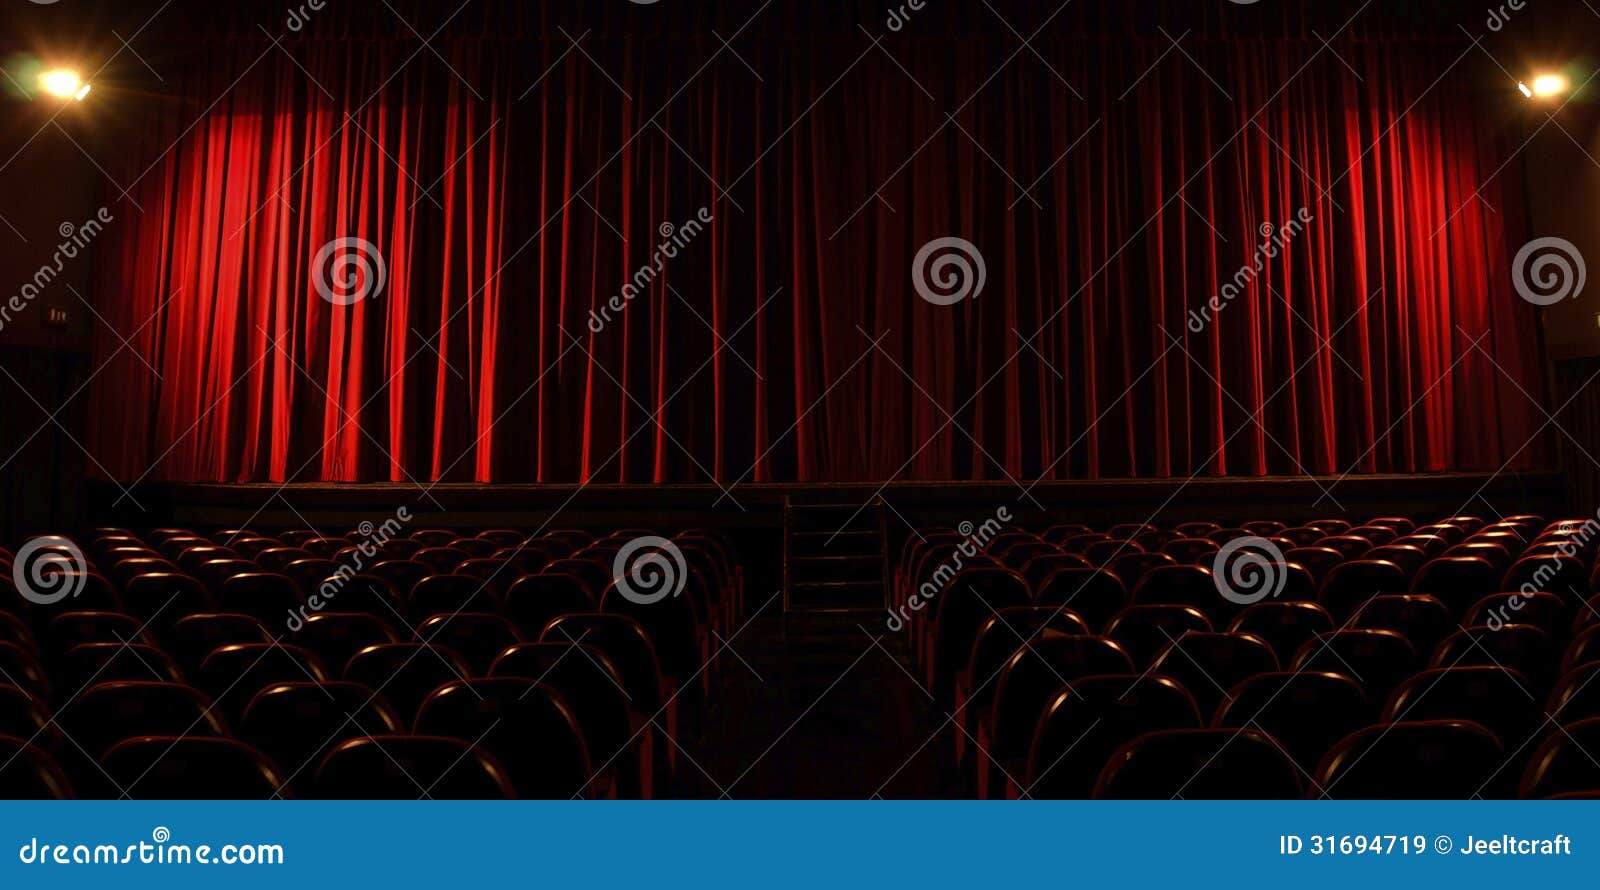 Bright stage stock image. Image of reflector, presentation - 31694719